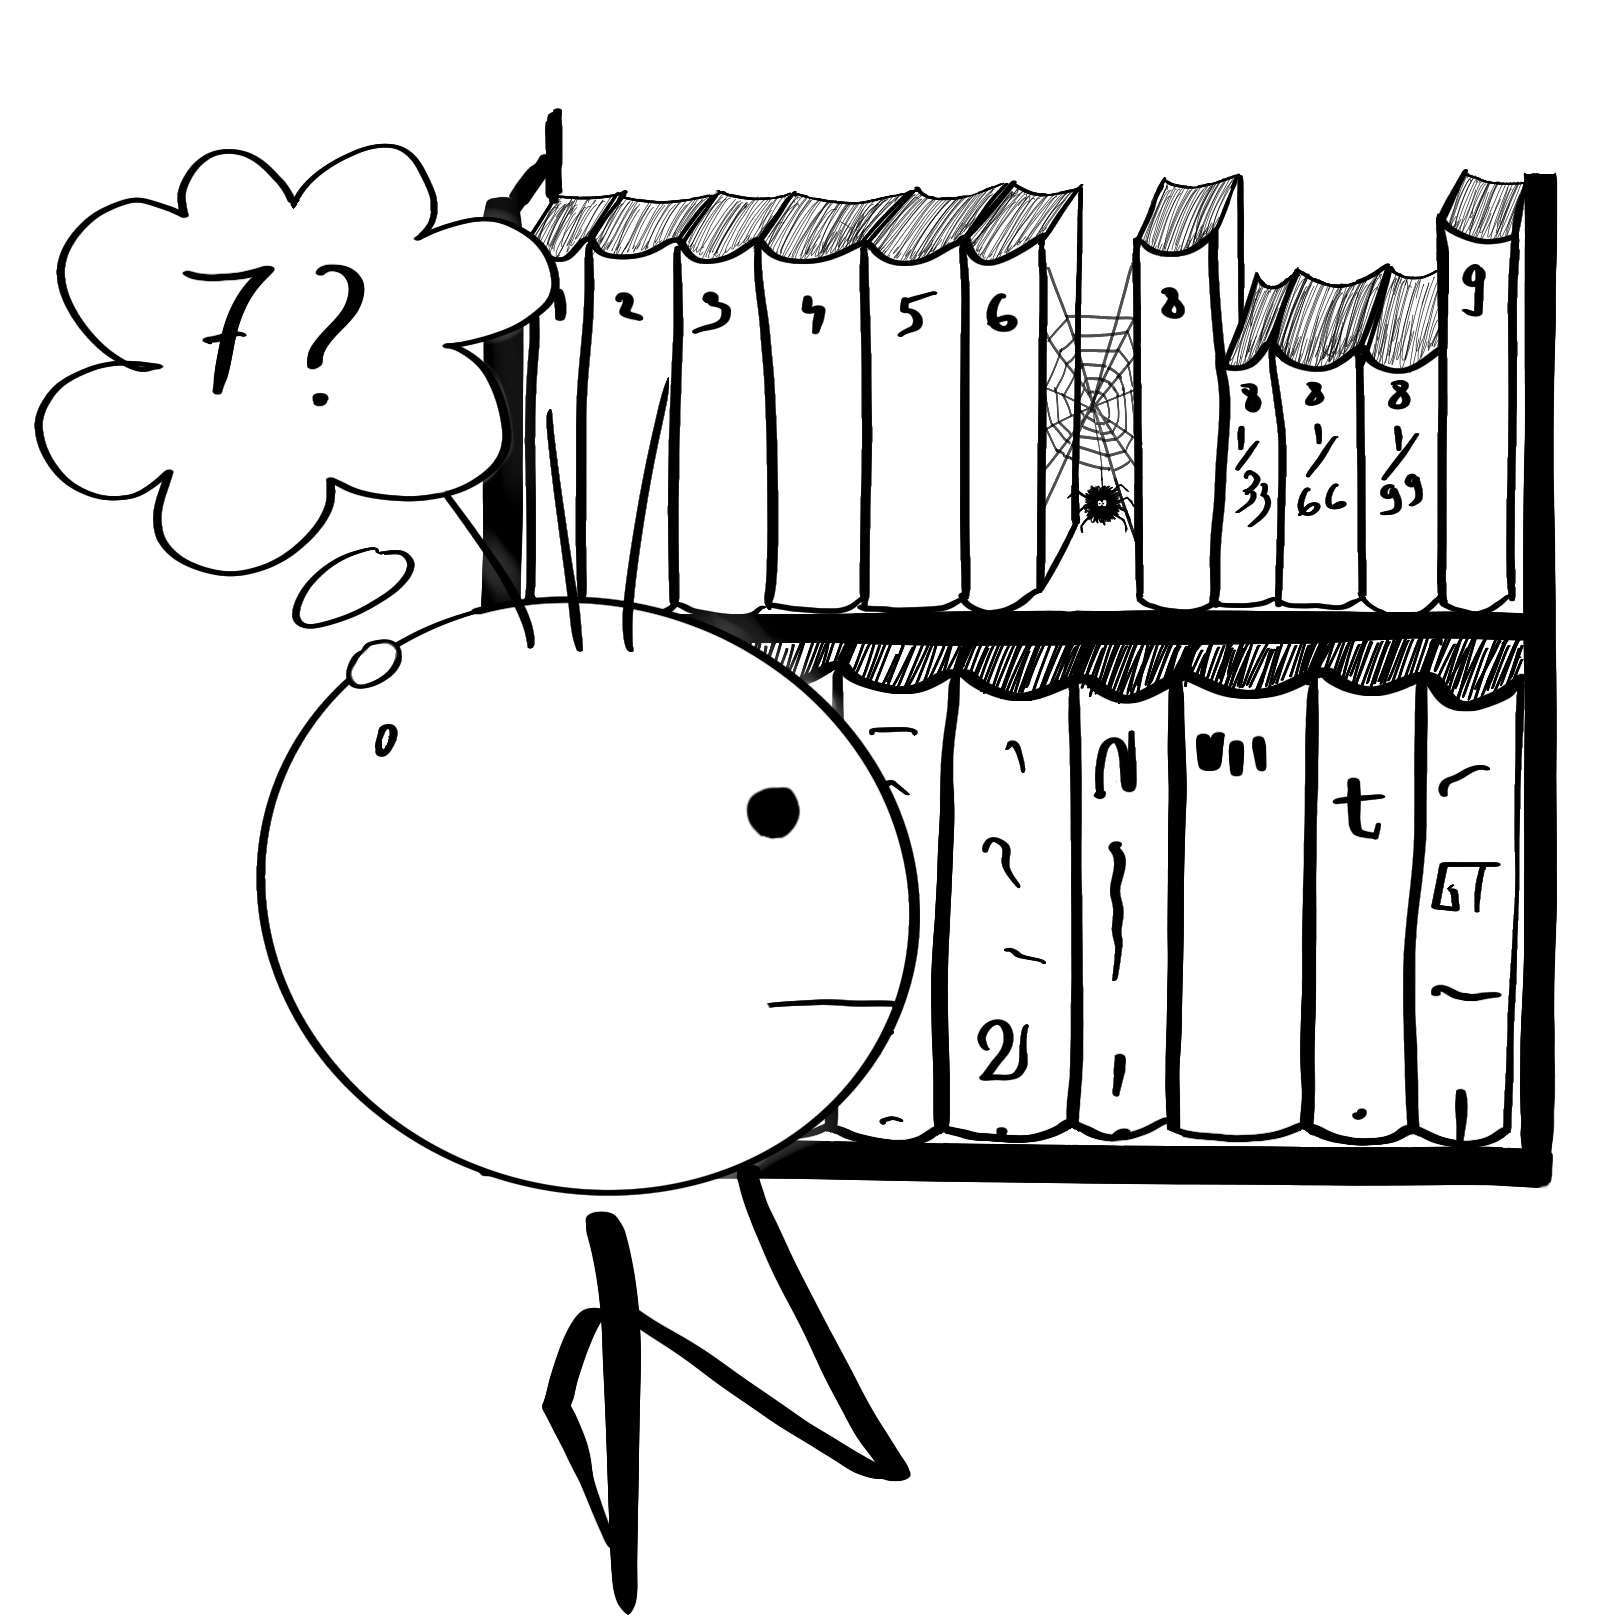 stick figure is at the library looking for book number 7, but can't find it. It seems to be not on the shelves, or in an illegible font.